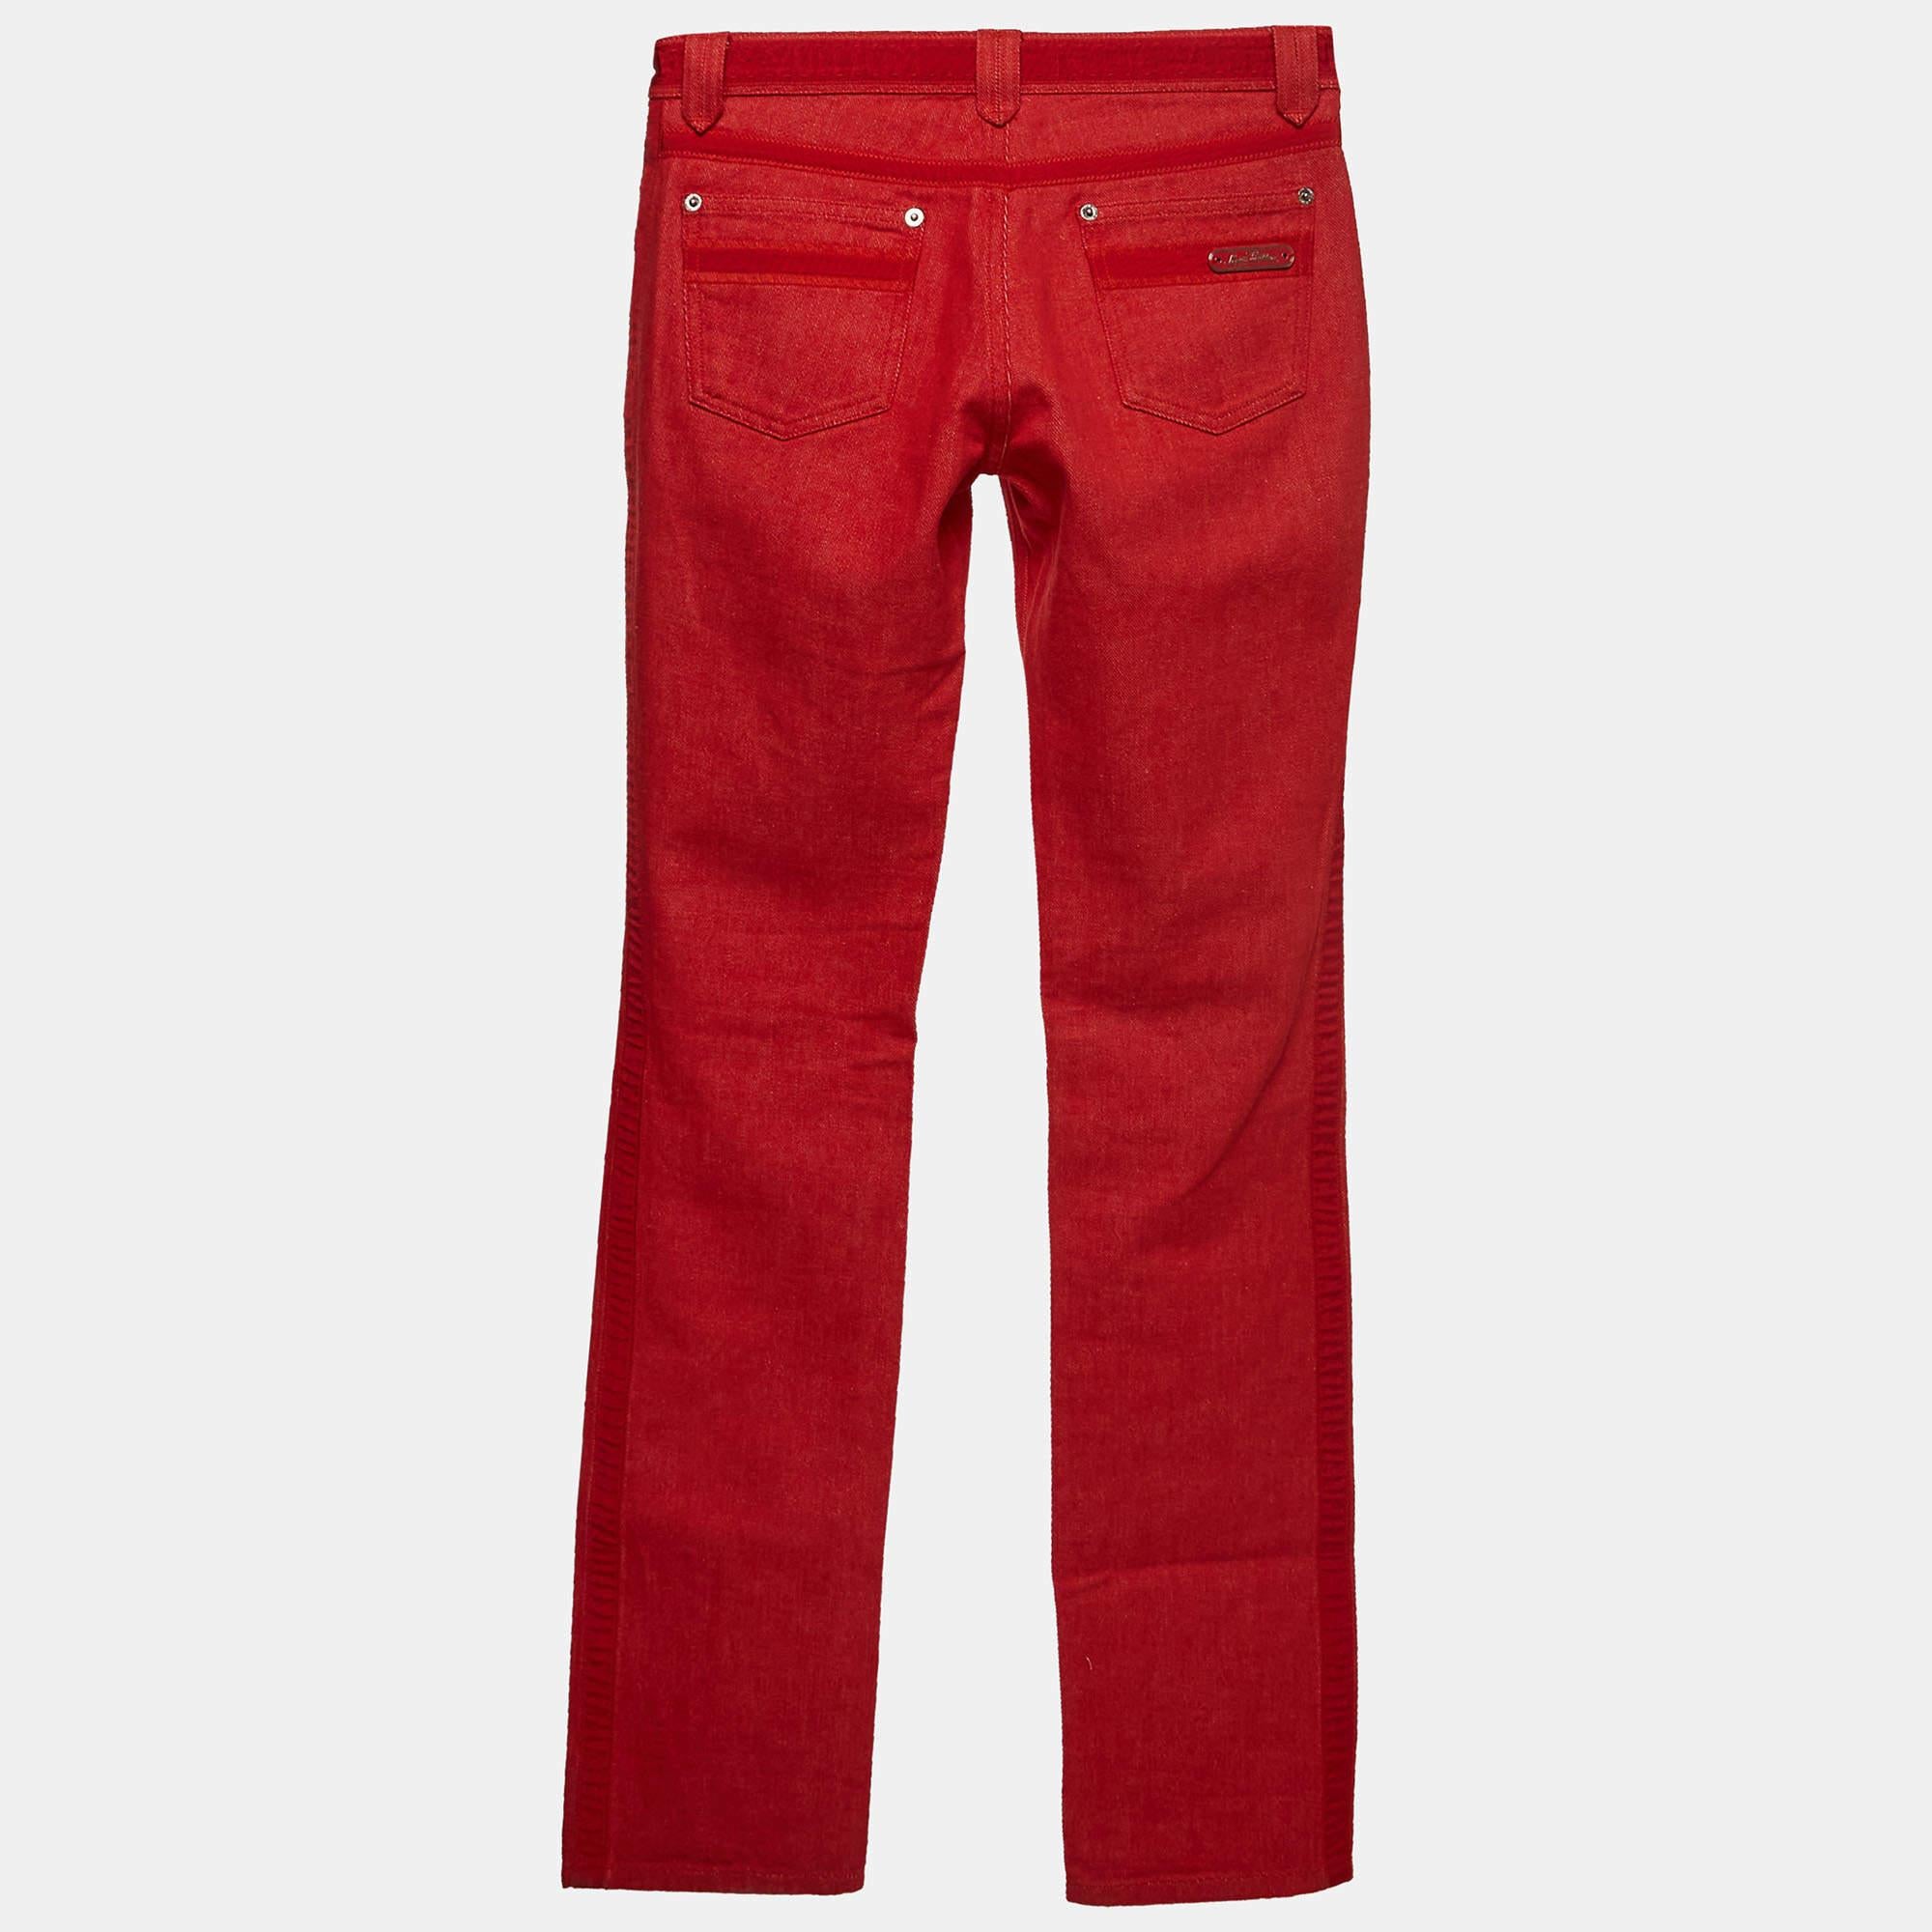 Pick these jeans from Louis Vuitton and feel absolutely stylish. They have been skillfully stitched using high-quality fabric and flaunt a superb fit. Pair these jeans with your favorite sneakers as you head out for the day.

